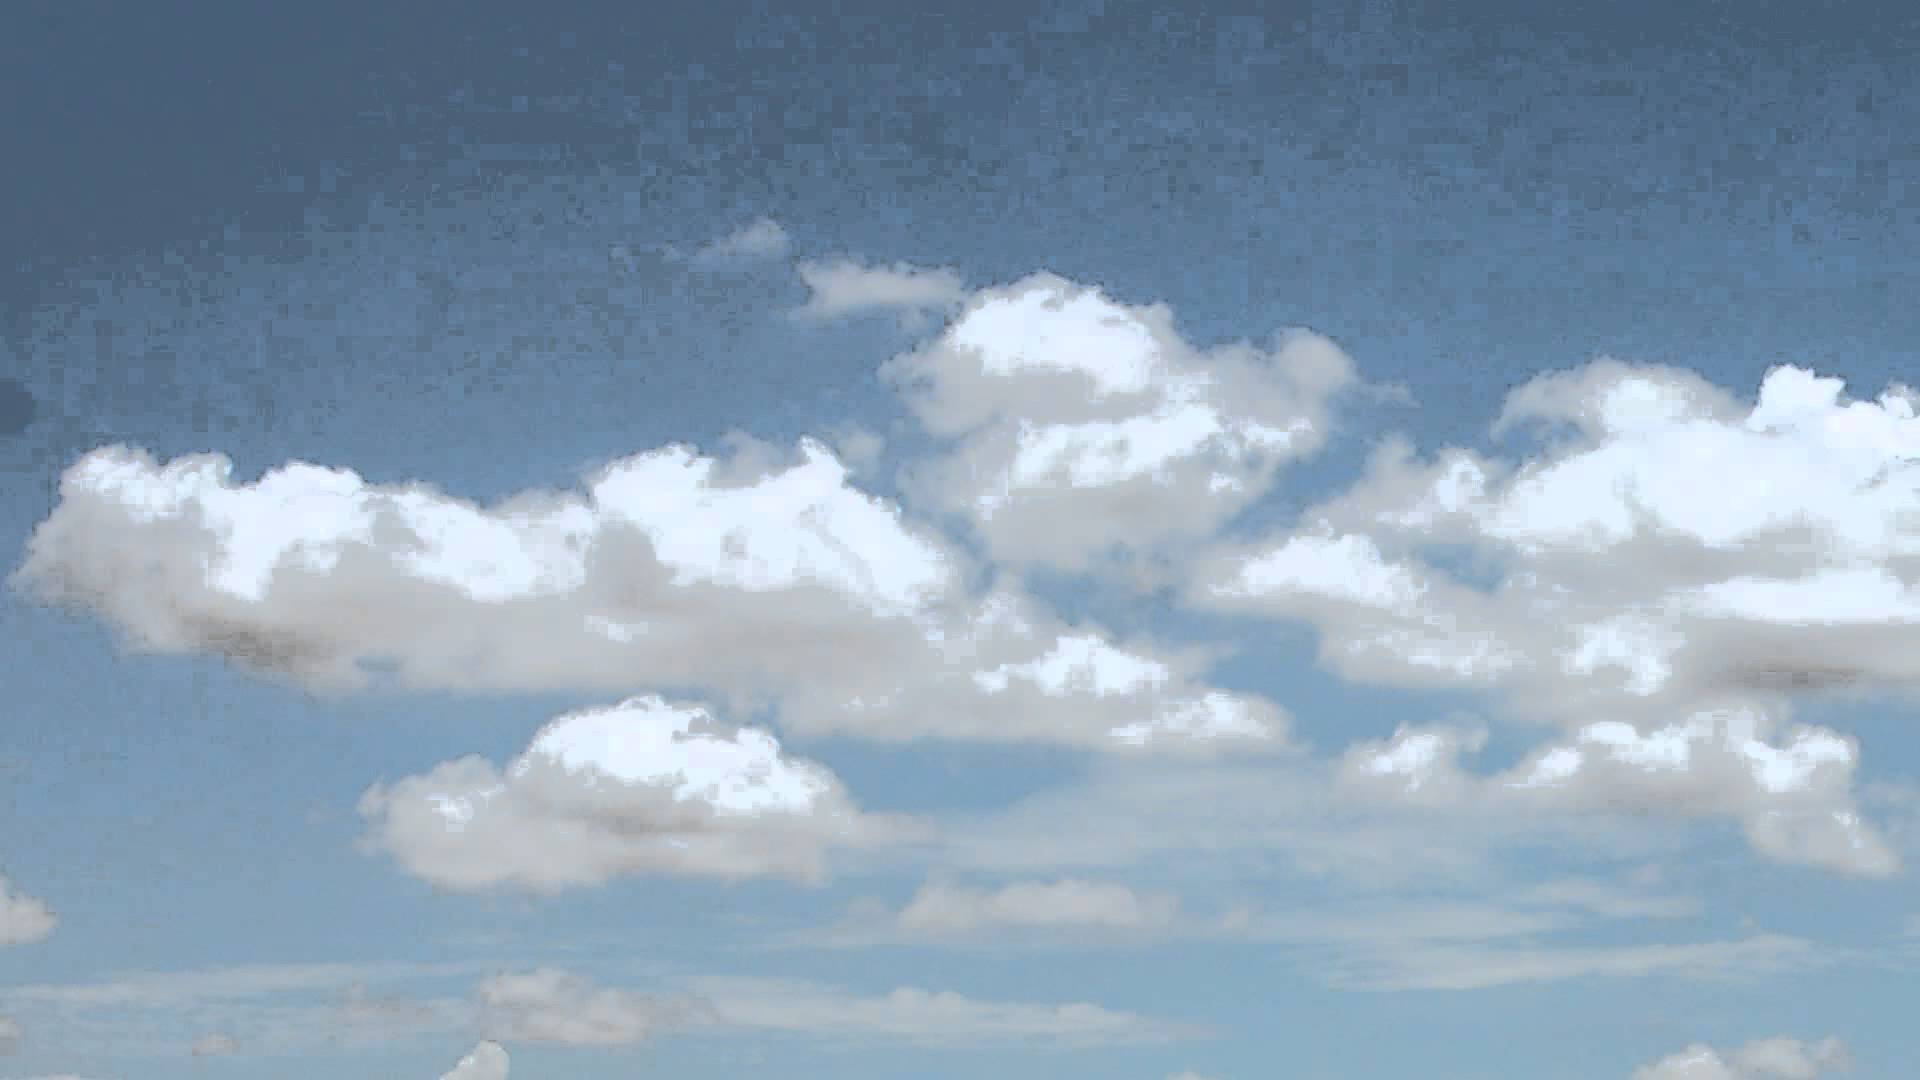 Animated Moving Clouds